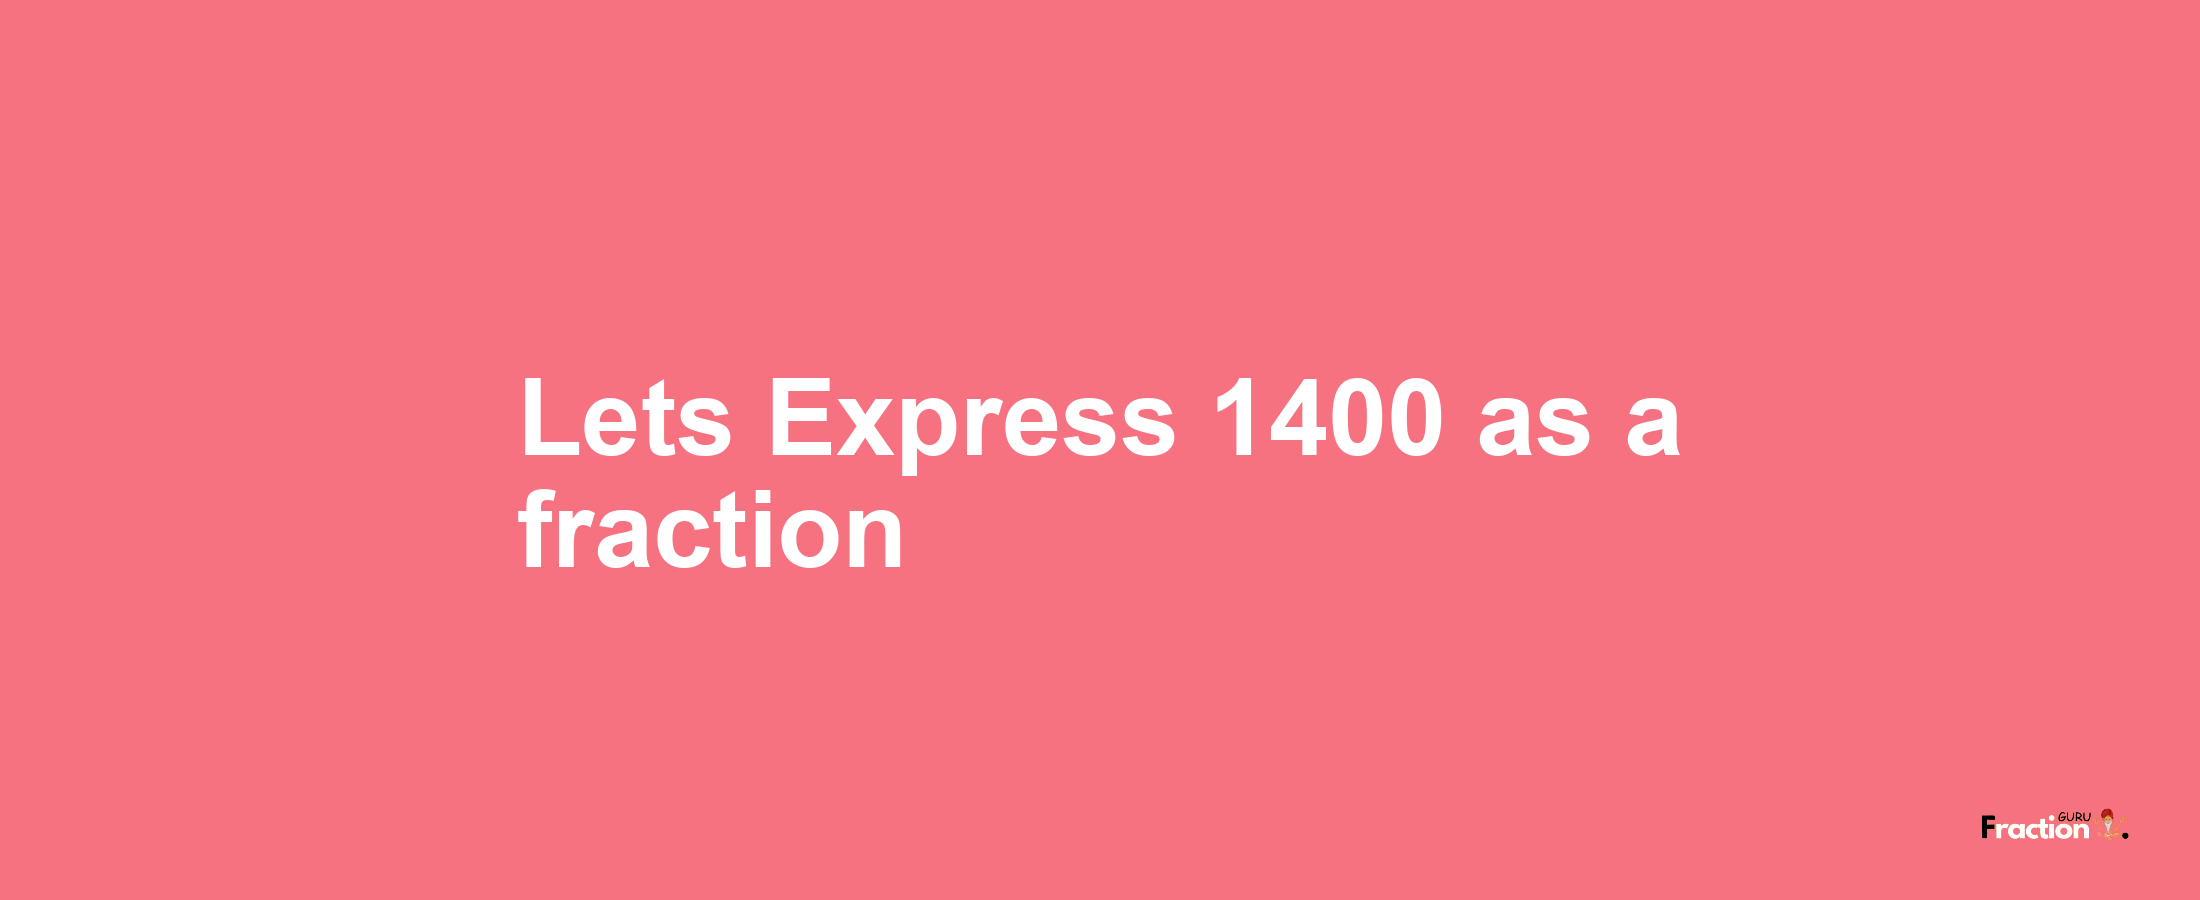 Lets Express 1400 as afraction